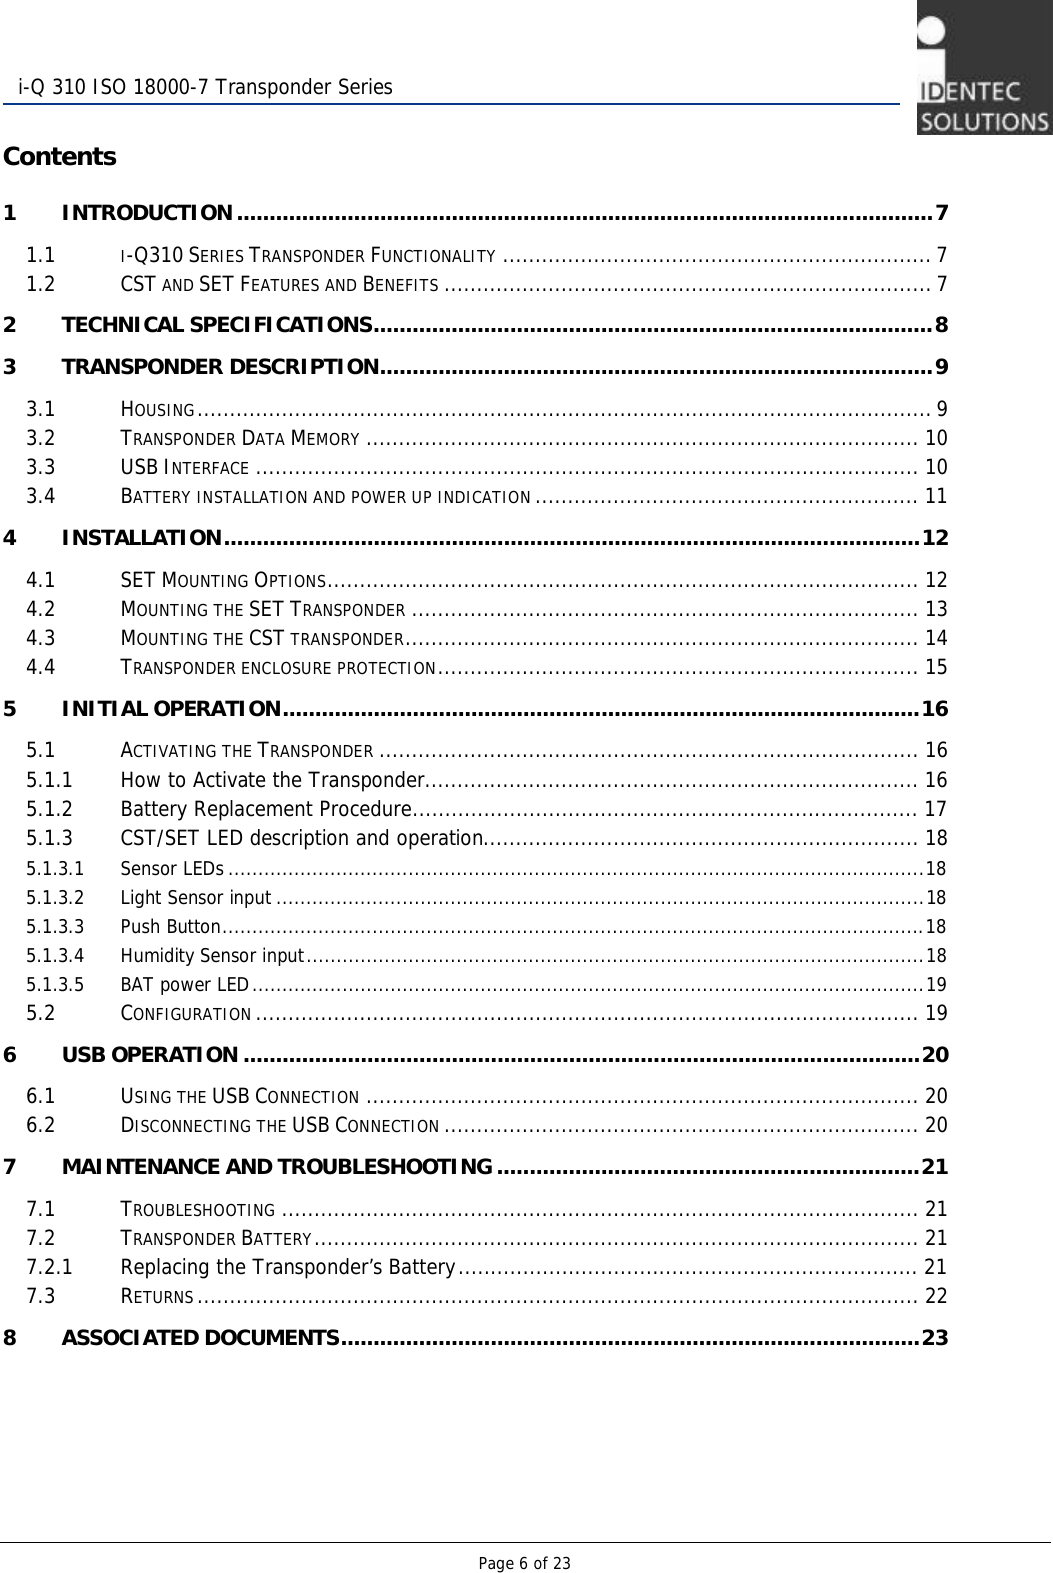   Page 6 of 23  i-Q 310 ISO 18000-7 Transponder Series Contents 1 INTRODUCTION...........................................................................................................7 1.1 I-Q310 SERIES TRANSPONDER FUNCTIONALITY .................................................................. 7 1.2 CST AND SET FEATURES AND BENEFITS ........................................................................... 7 2 TECHNICAL SPECIFICATIONS......................................................................................8 3 TRANSPONDER DESCRIPTION.....................................................................................9 3.1 HOUSING................................................................................................................. 9 3.2 TRANSPONDER DATA MEMORY ..................................................................................... 10 3.3 USB INTERFACE ...................................................................................................... 10 3.4 BATTERY INSTALLATION AND POWER UP INDICATION ........................................................... 11 4 INSTALLATION...........................................................................................................12 4.1 SET MOUNTING OPTIONS........................................................................................... 12 4.2 MOUNTING THE SET TRANSPONDER .............................................................................. 13 4.3 MOUNTING THE CST TRANSPONDER............................................................................... 14 4.4 TRANSPONDER ENCLOSURE PROTECTION.......................................................................... 15 5 INITIAL OPERATION..................................................................................................16 5.1 ACTIVATING THE TRANSPONDER ................................................................................... 16 5.1.1 How to Activate the Transponder............................................................................ 16 5.1.2 Battery Replacement Procedure.............................................................................. 17 5.1.3 CST/SET LED description and operation................................................................... 18 5.1.3.1 Sensor LEDs....................................................................................................................18 5.1.3.2 Light Sensor input ............................................................................................................18 5.1.3.3 Push Button.....................................................................................................................18 5.1.3.4 Humidity Sensor input.......................................................................................................18 5.1.3.5 BAT power LED................................................................................................................19 5.2 CONFIGURATION ...................................................................................................... 19 6 USB OPERATION ........................................................................................................20 6.1 USING THE USB CONNECTION ..................................................................................... 20 6.2 DISCONNECTING THE USB CONNECTION ......................................................................... 20 7 MAINTENANCE AND TROUBLESHOOTING .................................................................21 7.1 TROUBLESHOOTING .................................................................................................. 21 7.2 TRANSPONDER BATTERY............................................................................................. 21 7.2.1 Replacing the Transponder’s Battery....................................................................... 21 7.3 RETURNS............................................................................................................... 22 8 ASSOCIATED DOCUMENTS.........................................................................................23       